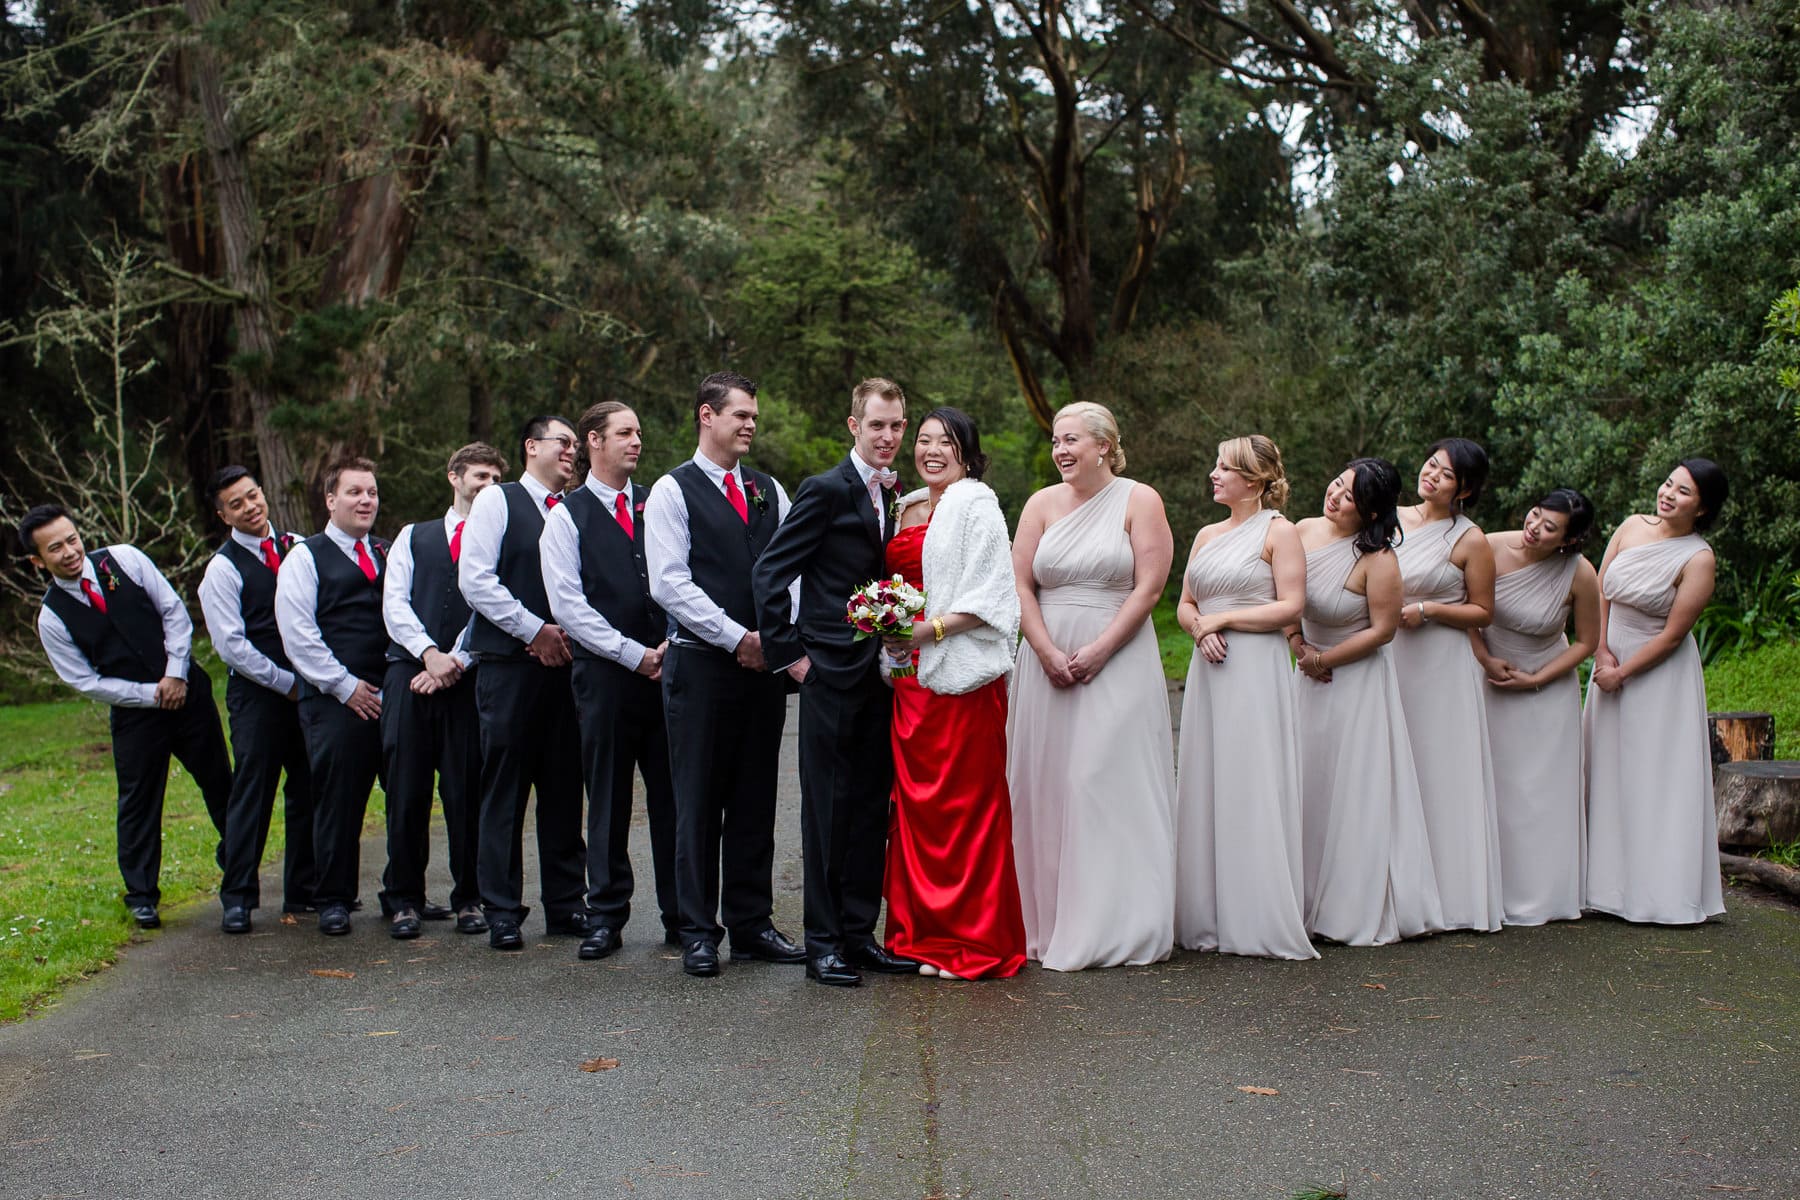 Bride and groom with their bridal party outdoors